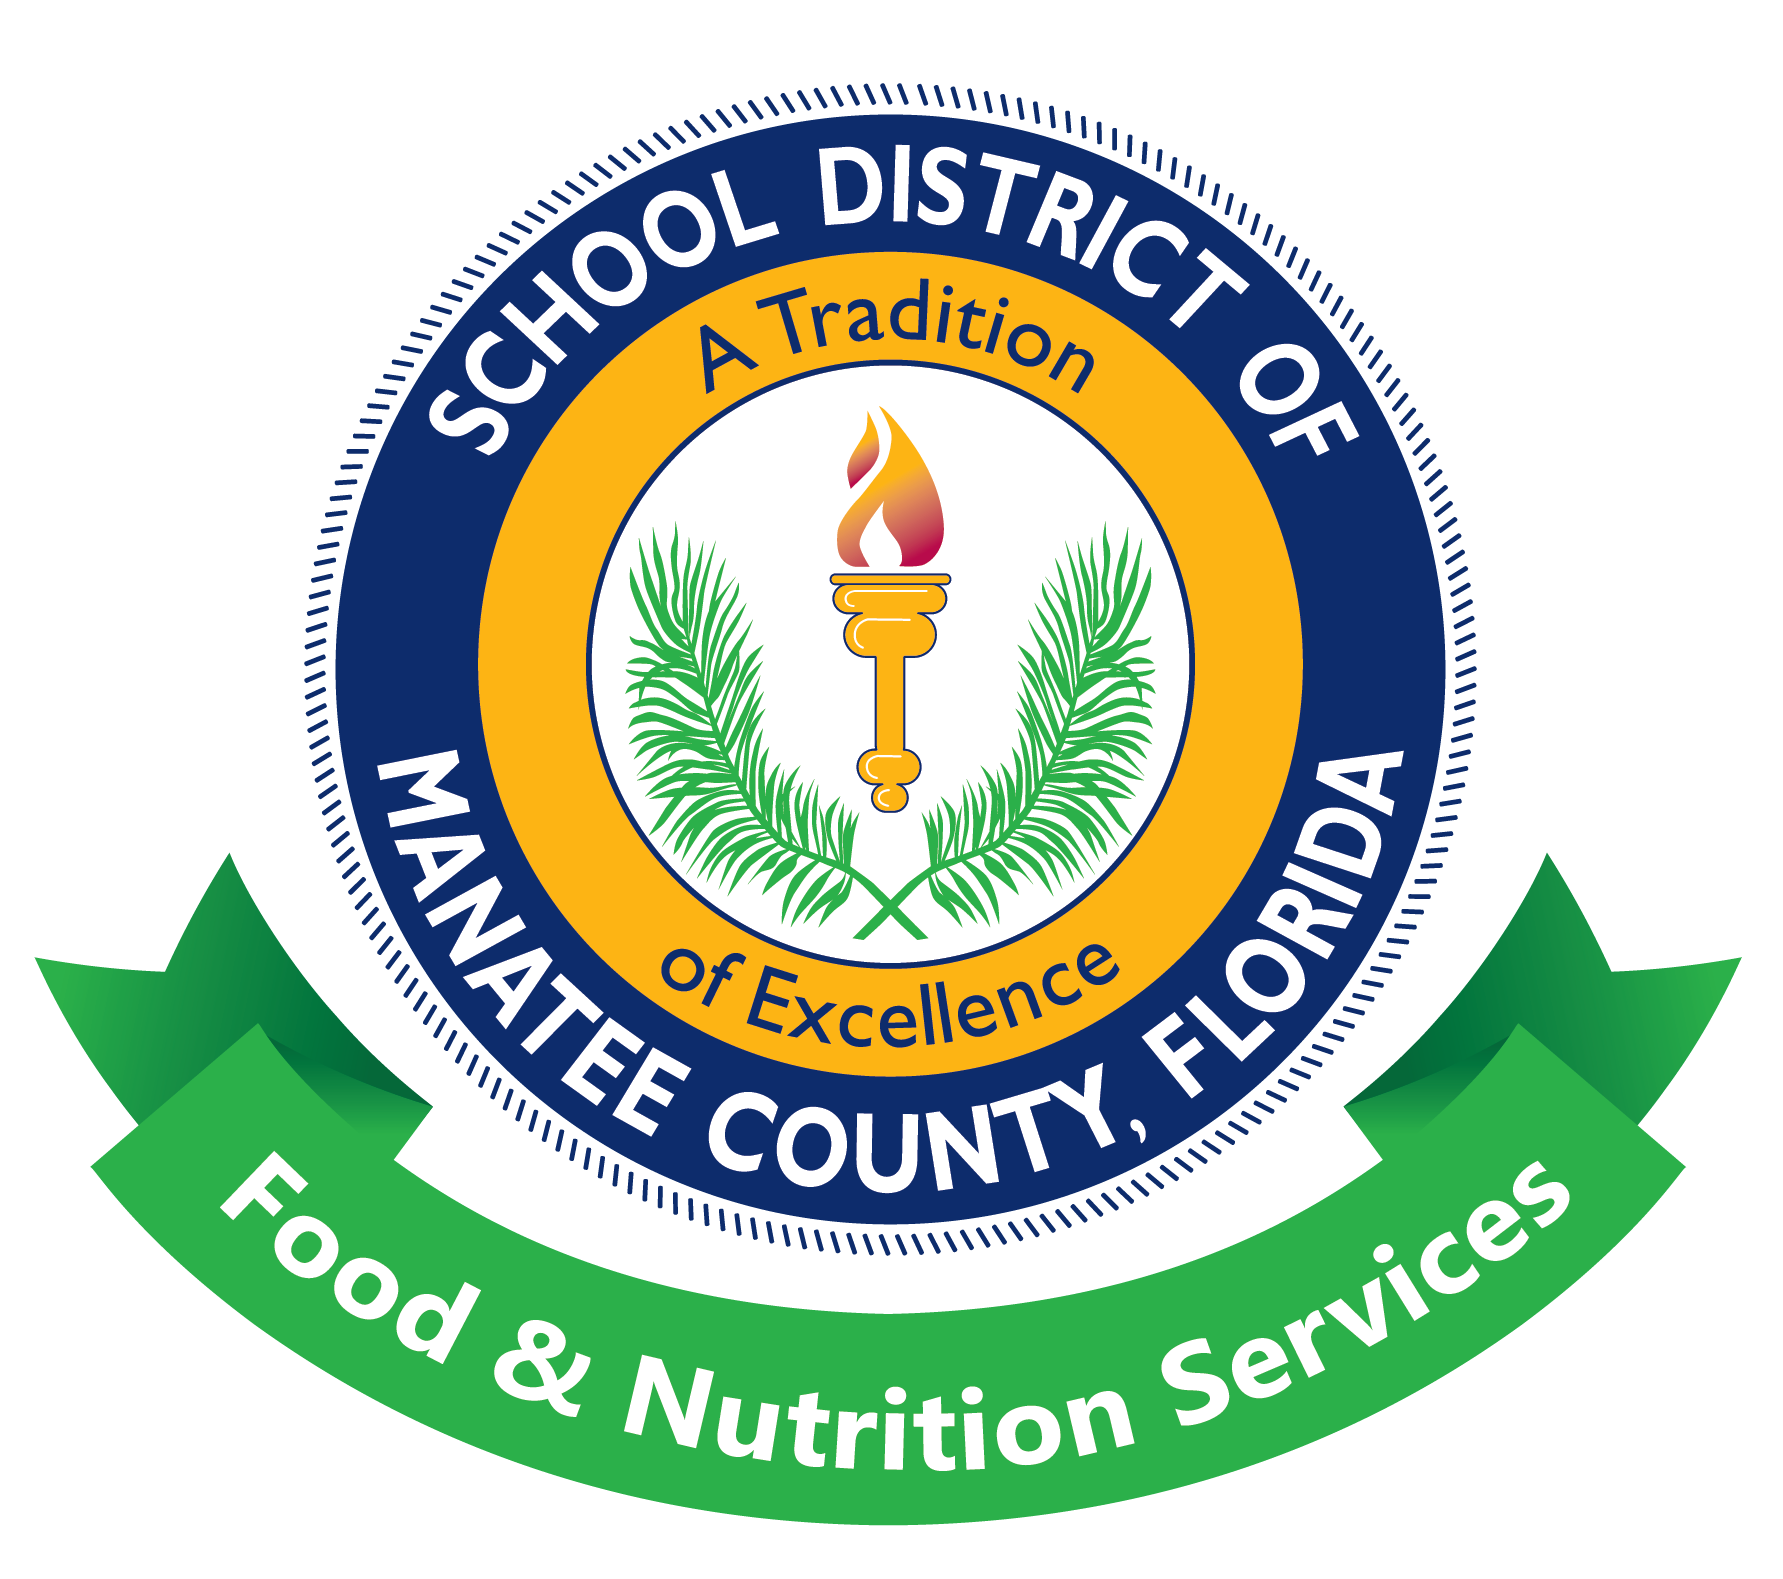  Food & Nutrition Services, Manatee County School District